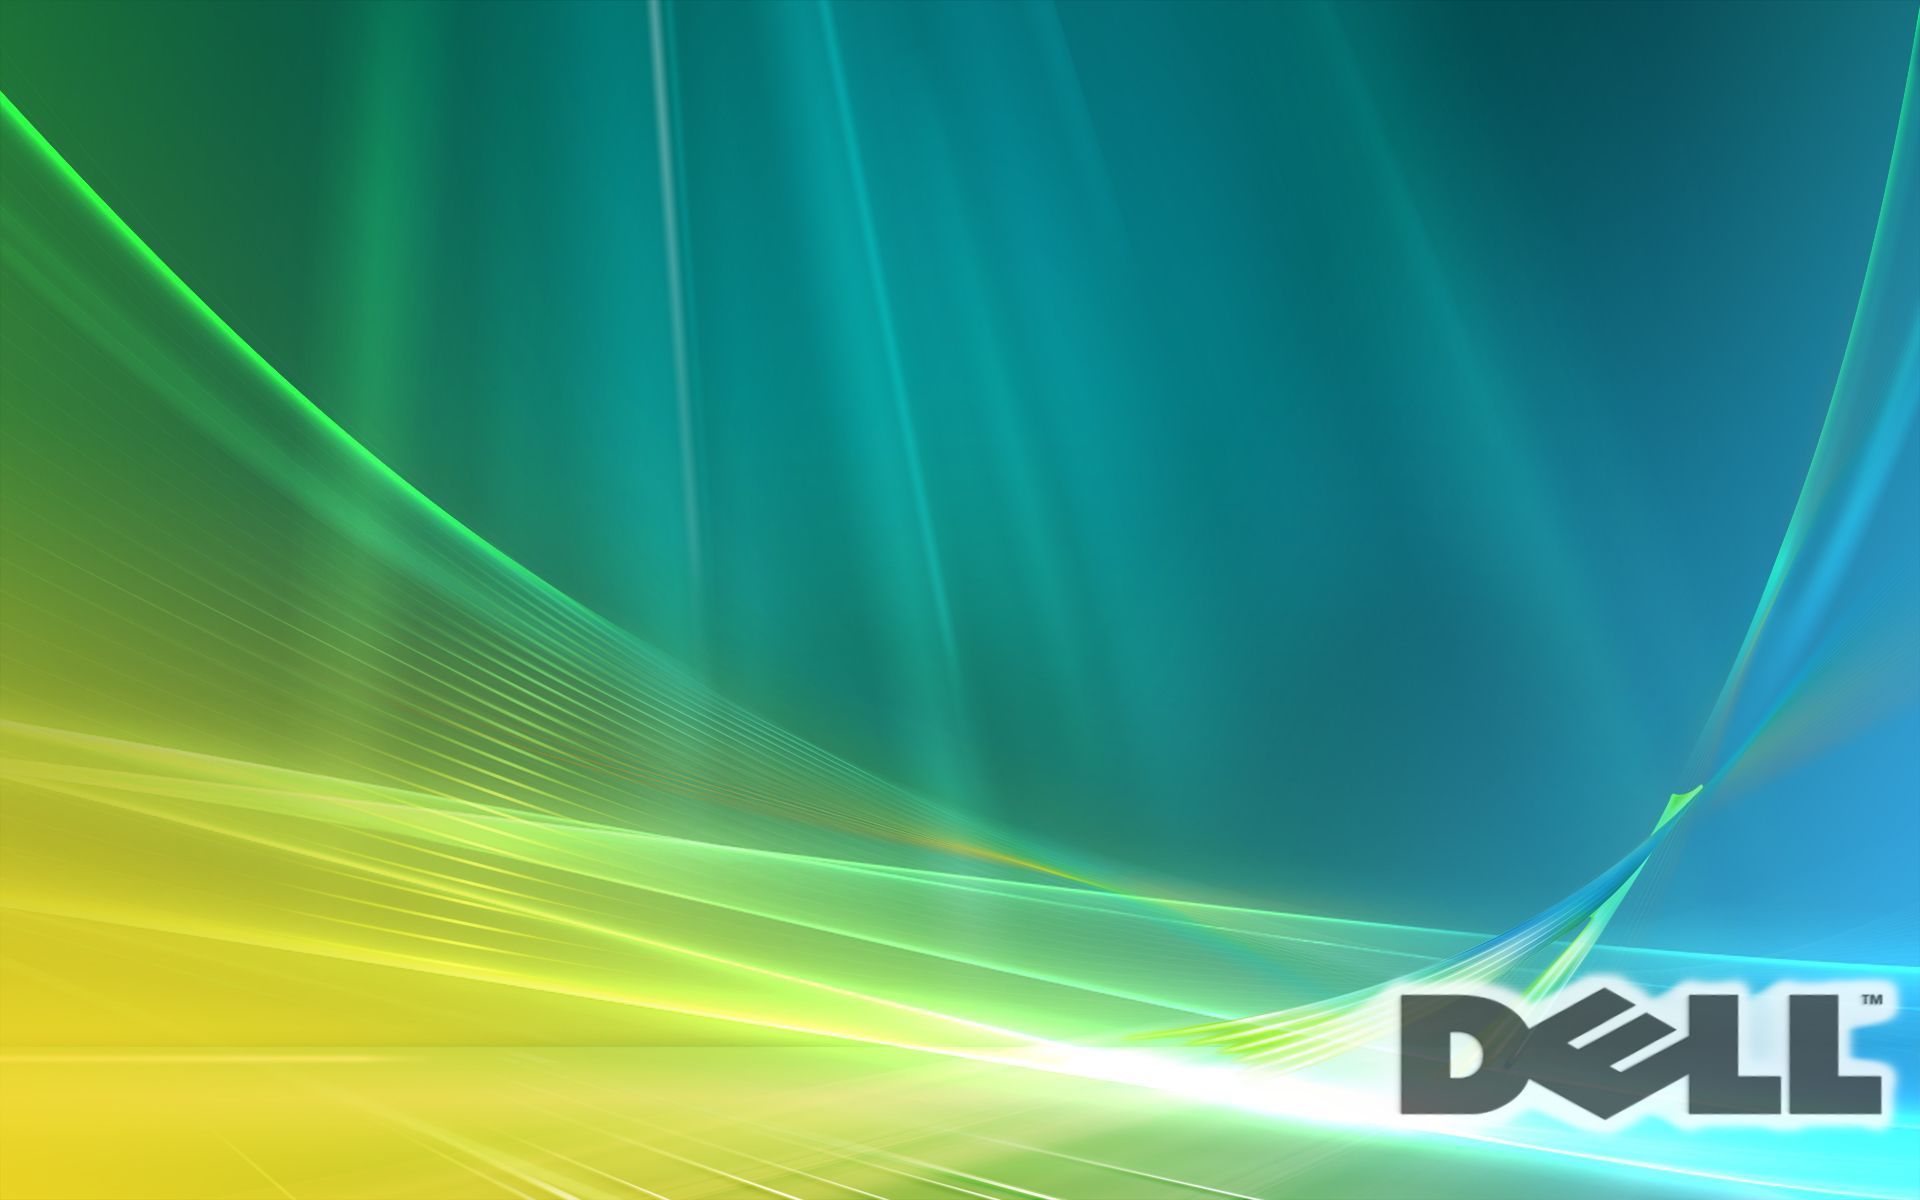 Wallpapers Dell 1920x1200 | #649572 #dell